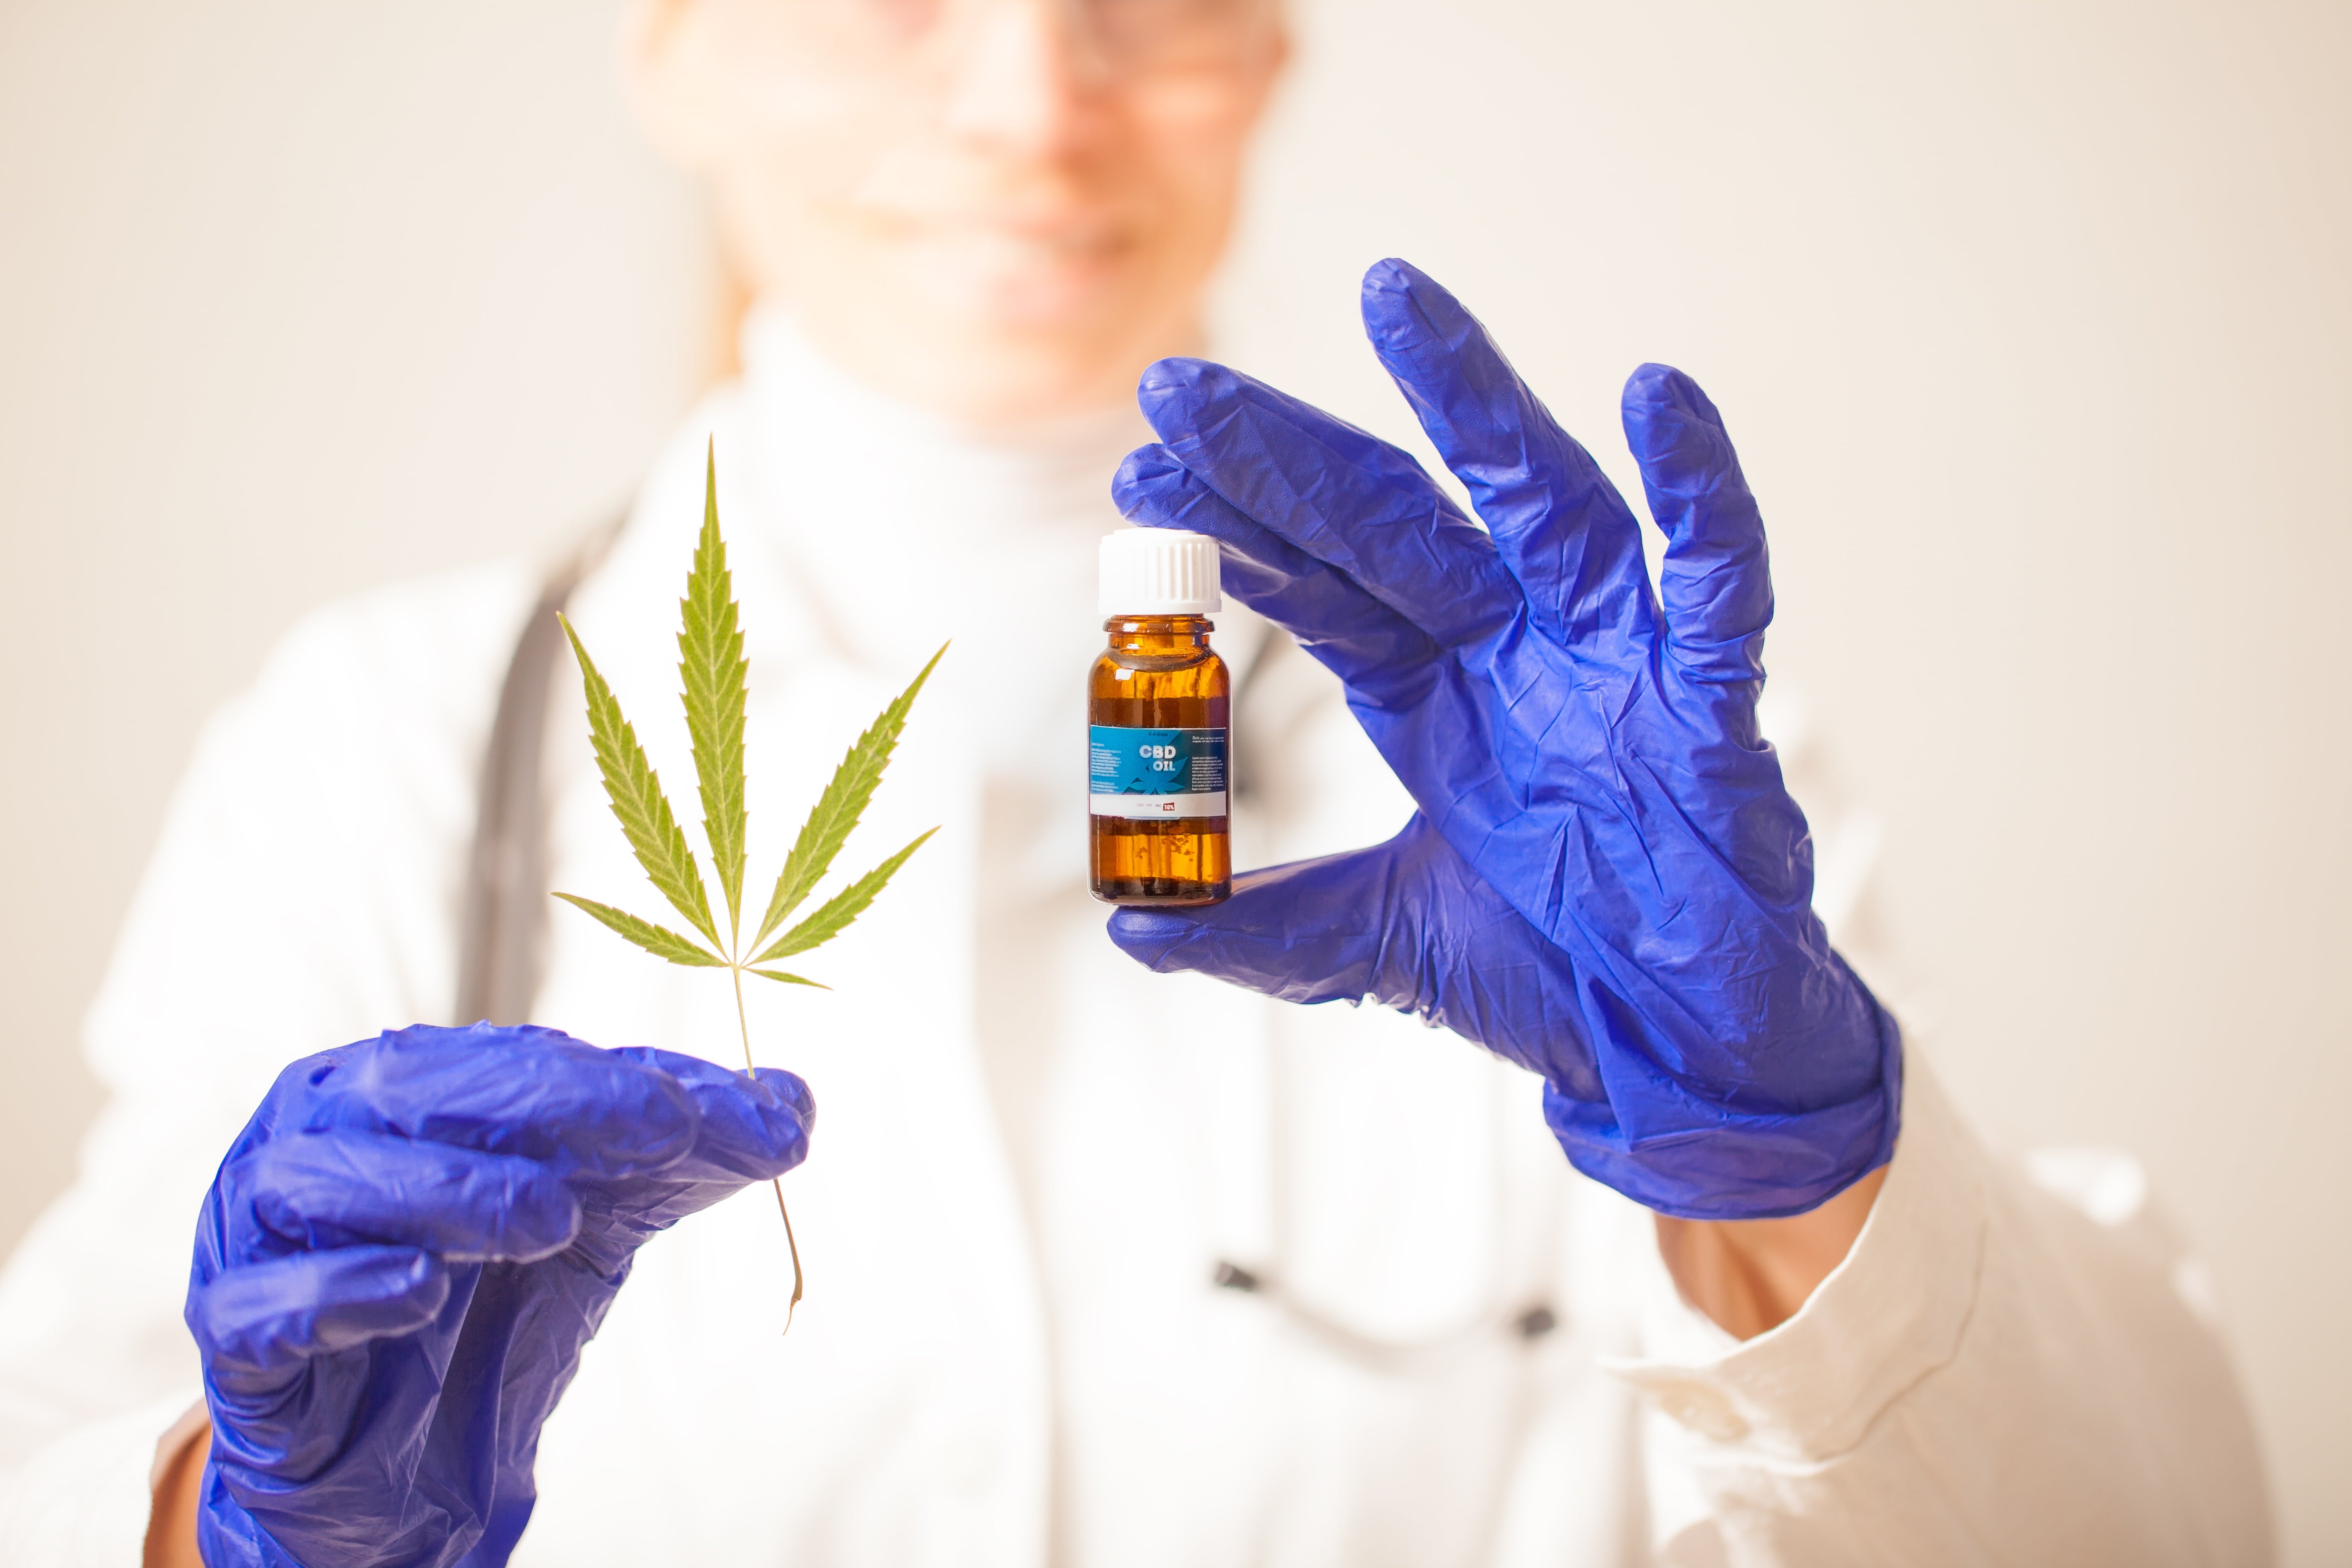 A gloved scientist with a vial of CBD and a hemp leaf. 'Full spectrum' extracts contain more cannabinoids, terpenes, and other beneficial chemicals found in hemp & cannabis.